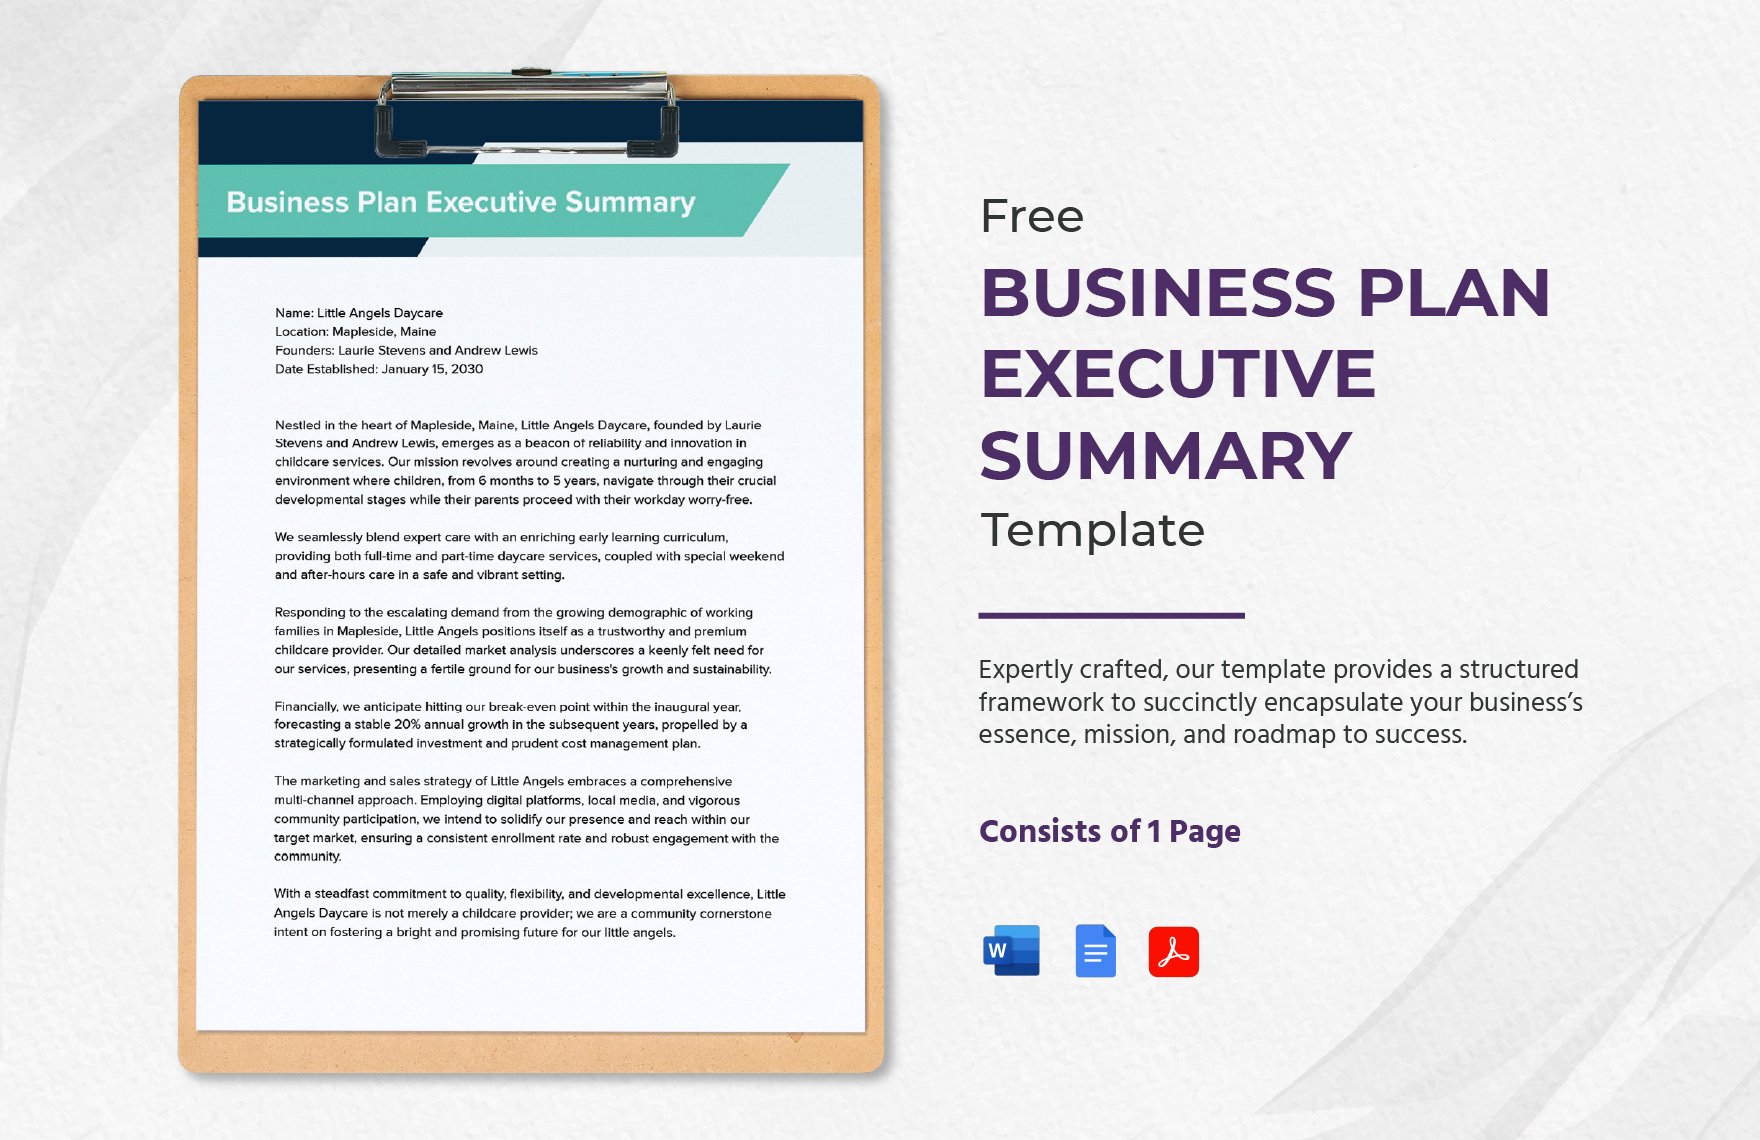 Free Business Plan Executive Summary Template